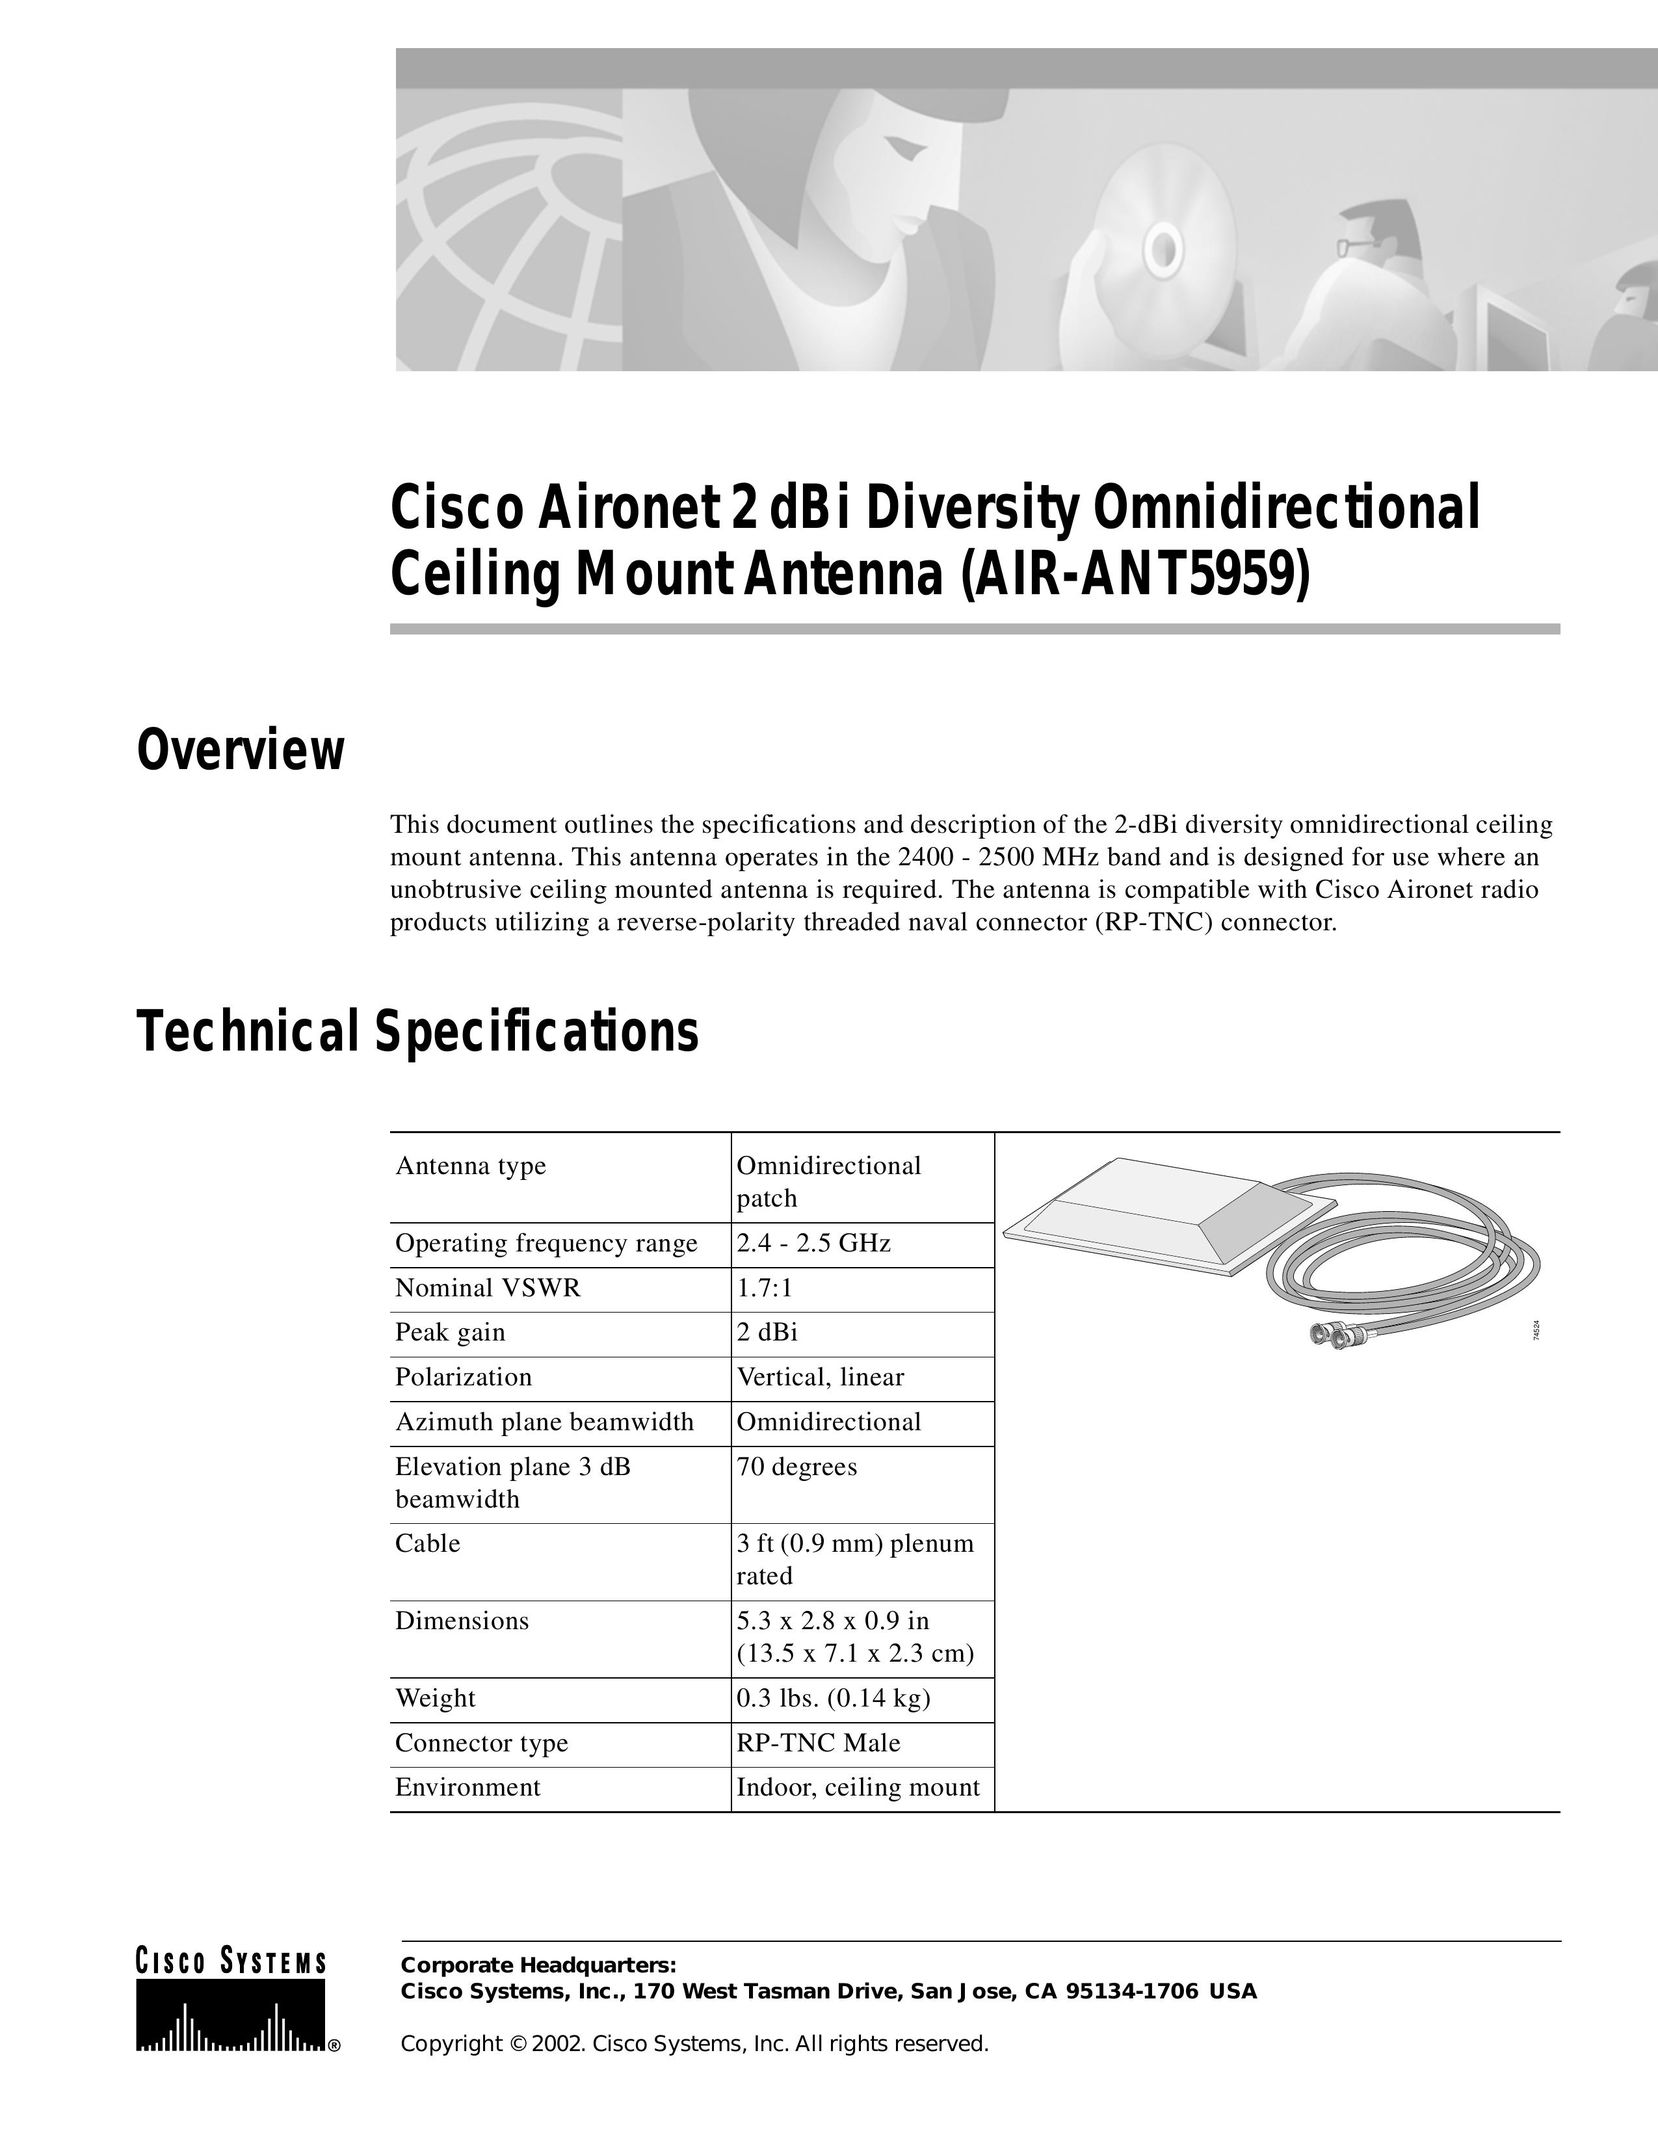 Cisco Systems AIR-ANT5959 Stereo System User Manual